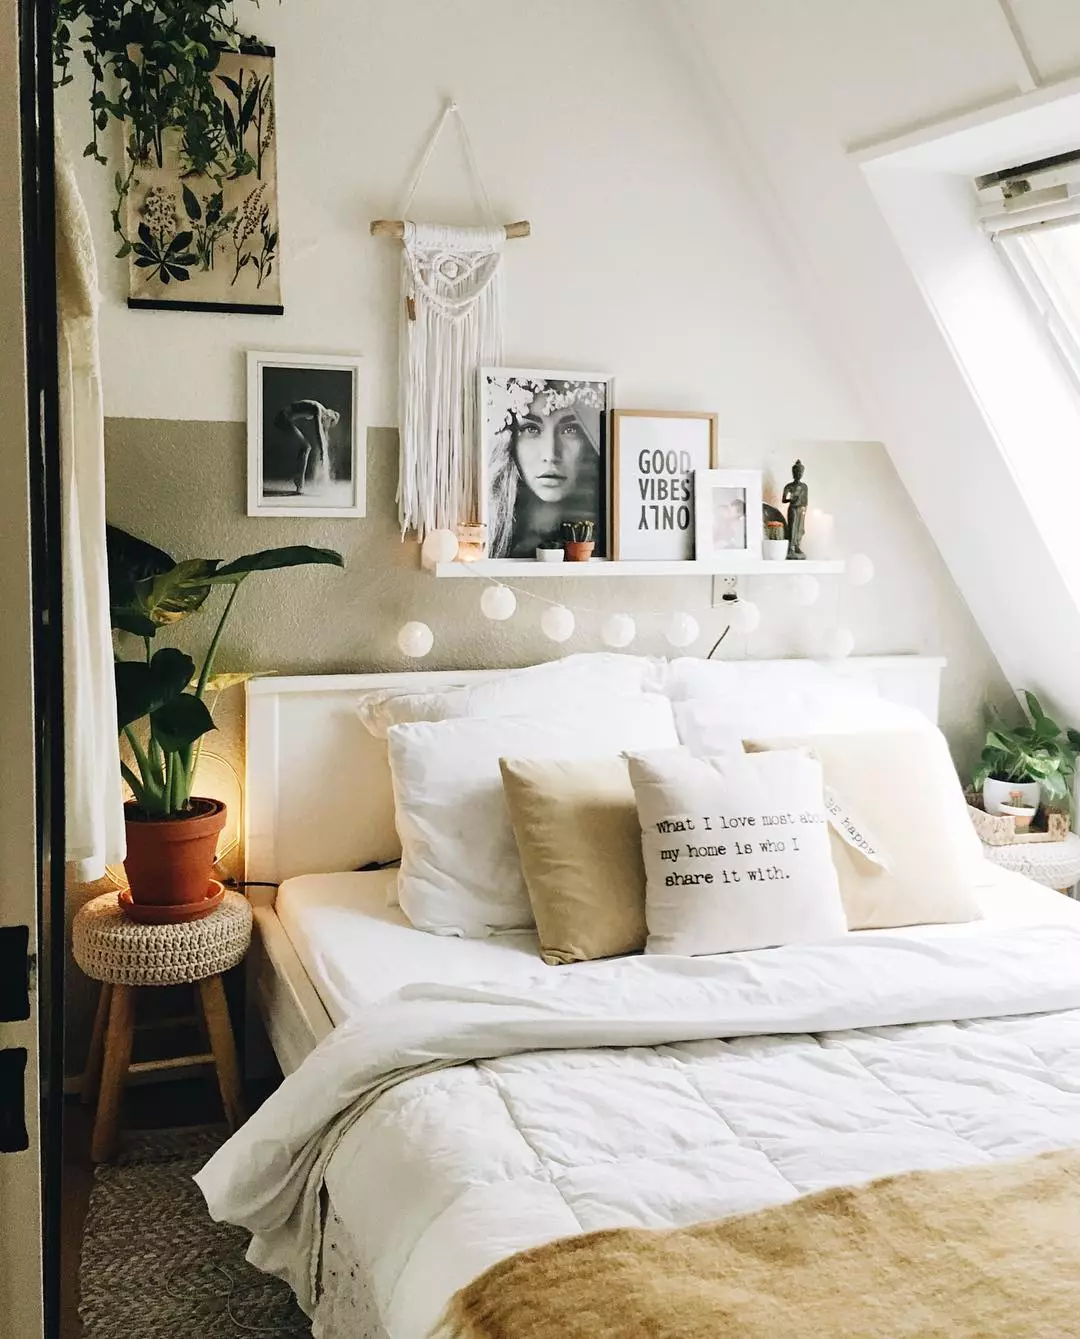 20 Small Bedroom Ideas How to Make Your Room Look Bigger ...